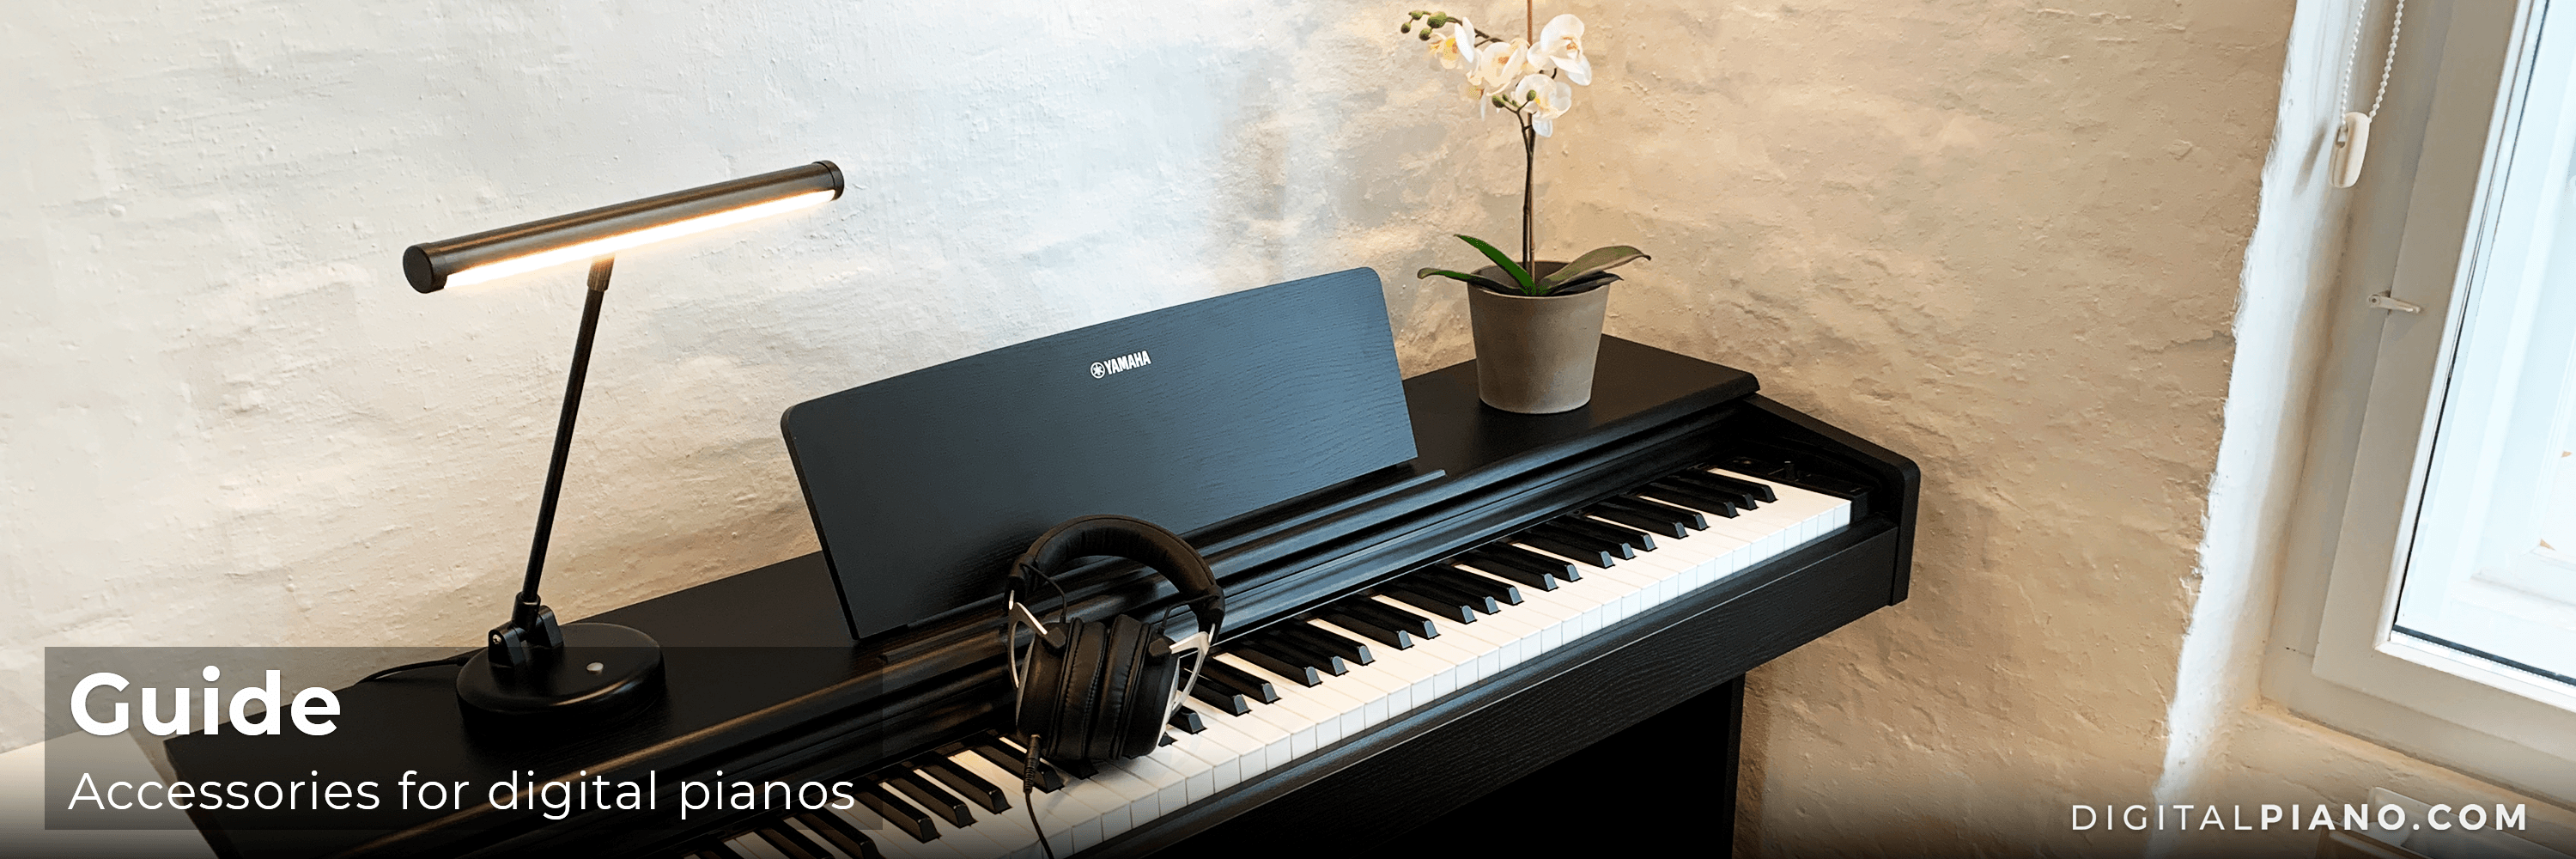 Guide to Accessories for digital pianos